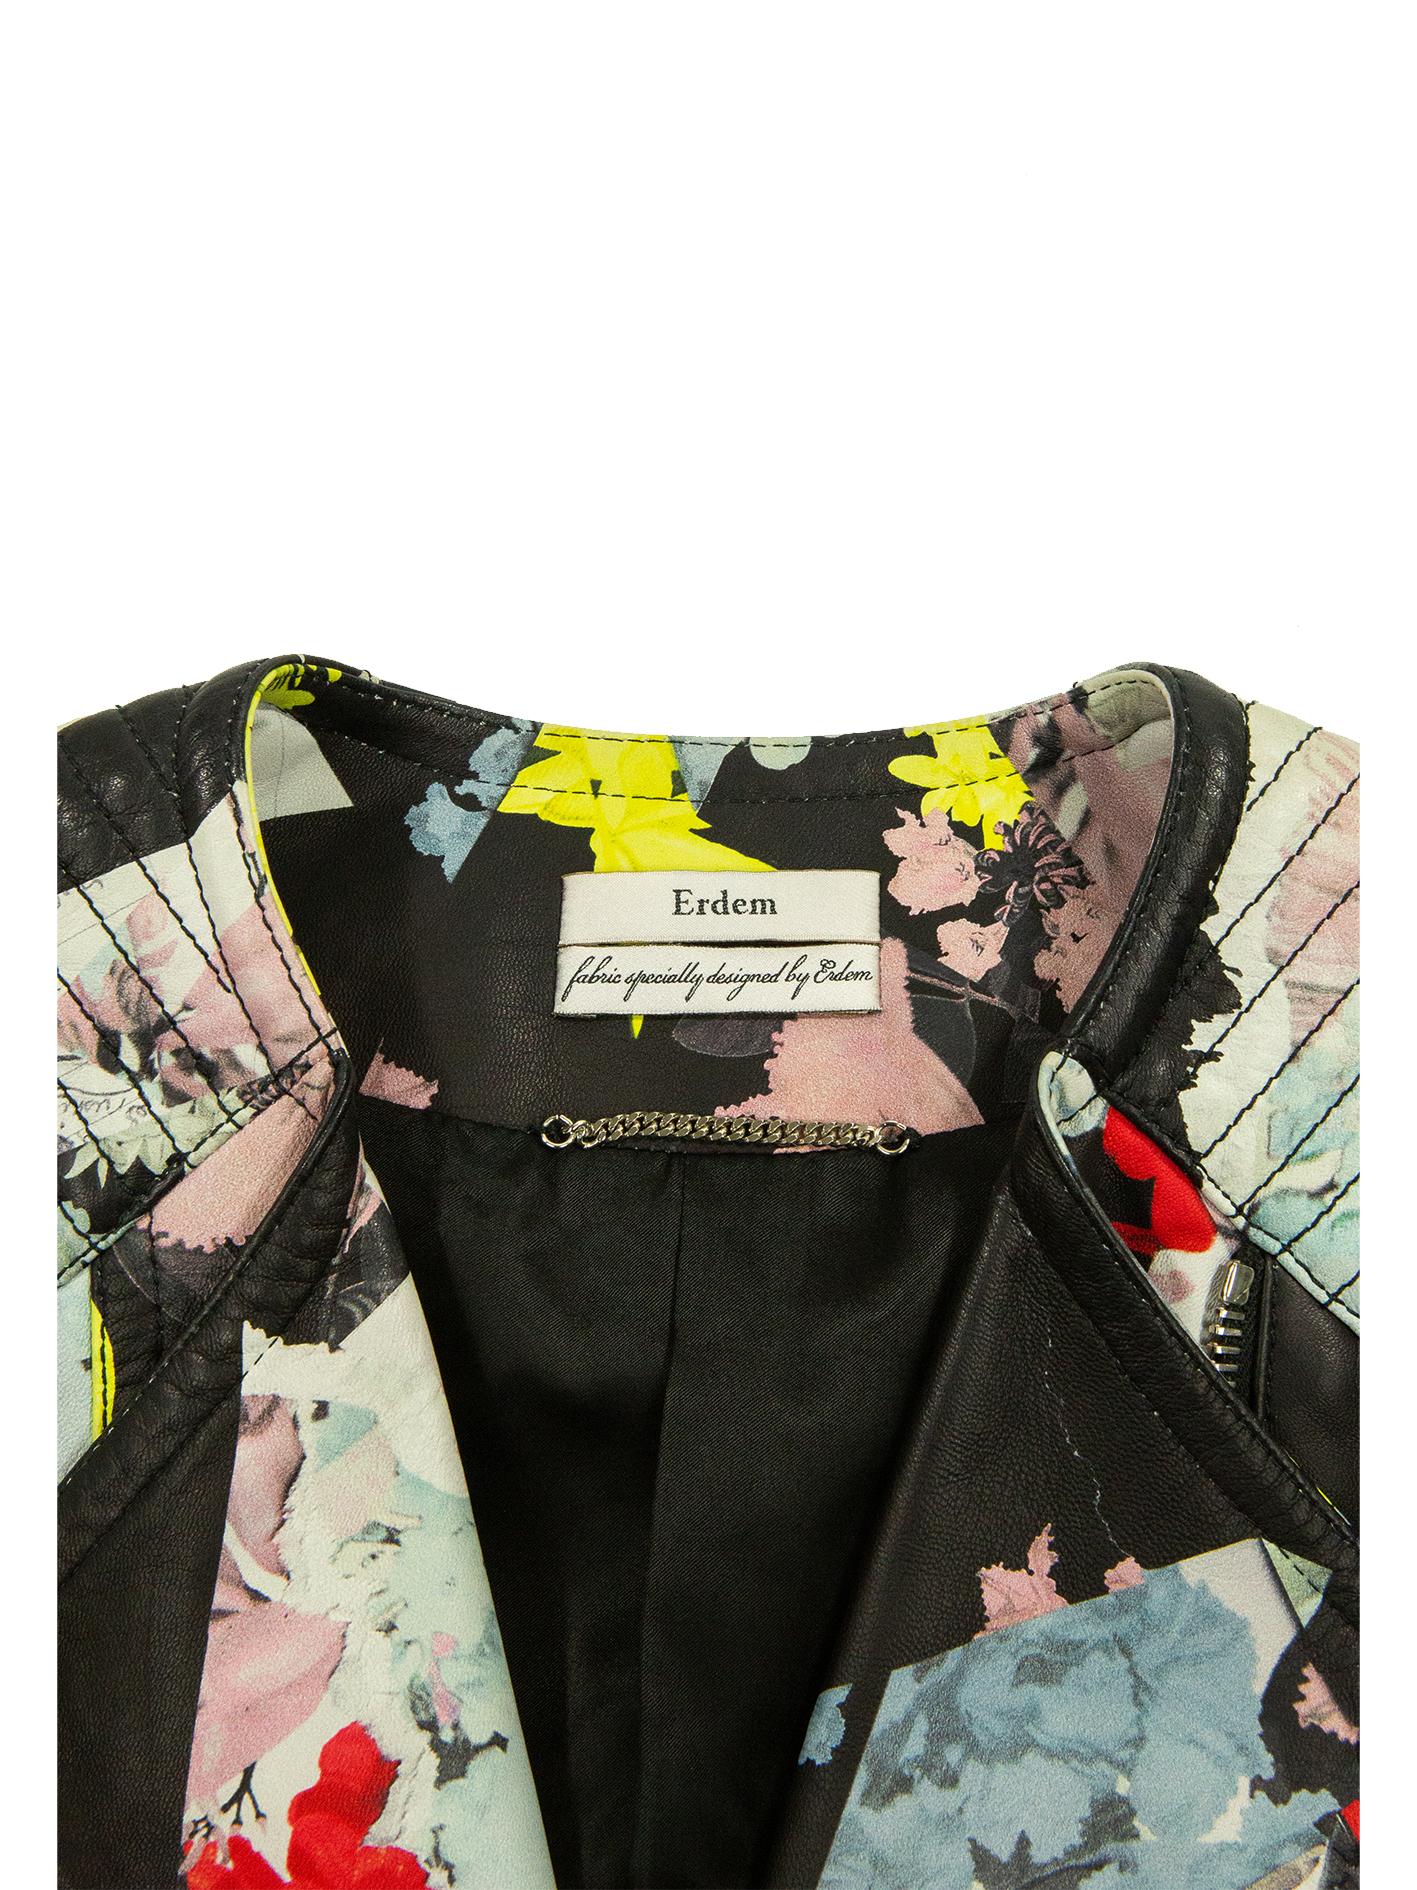 Floral And Abstract Printed Erdem Leather Biker Jacket  For Sale 2